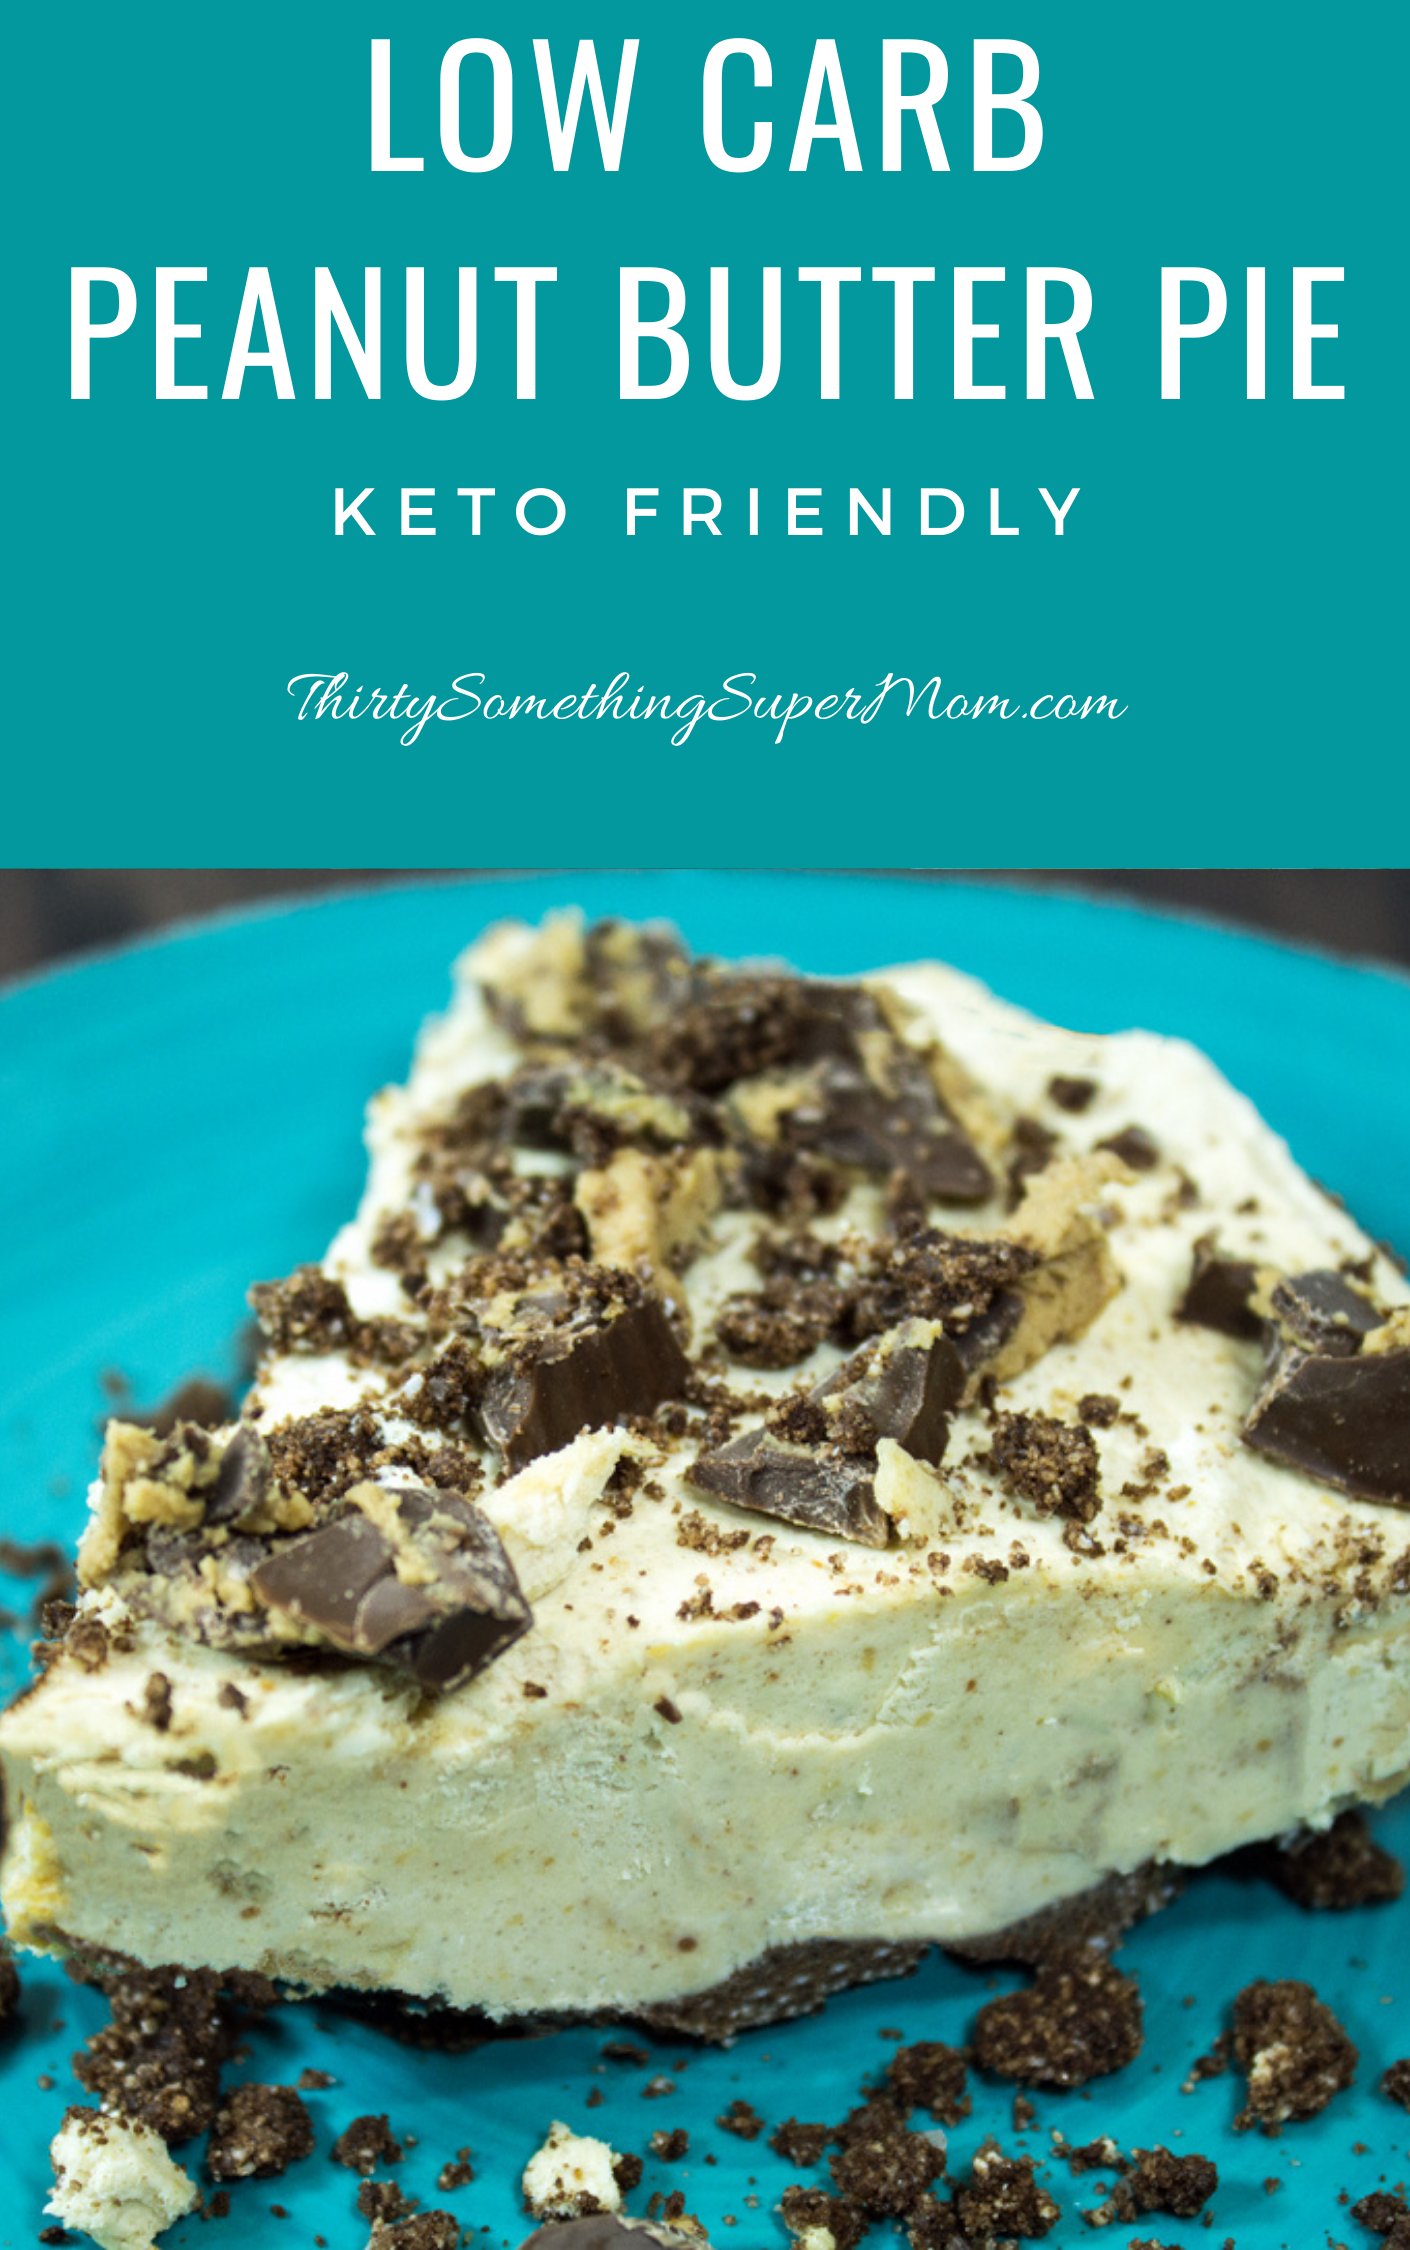 Easy Low Carb Peanut Butter Pie Recipe